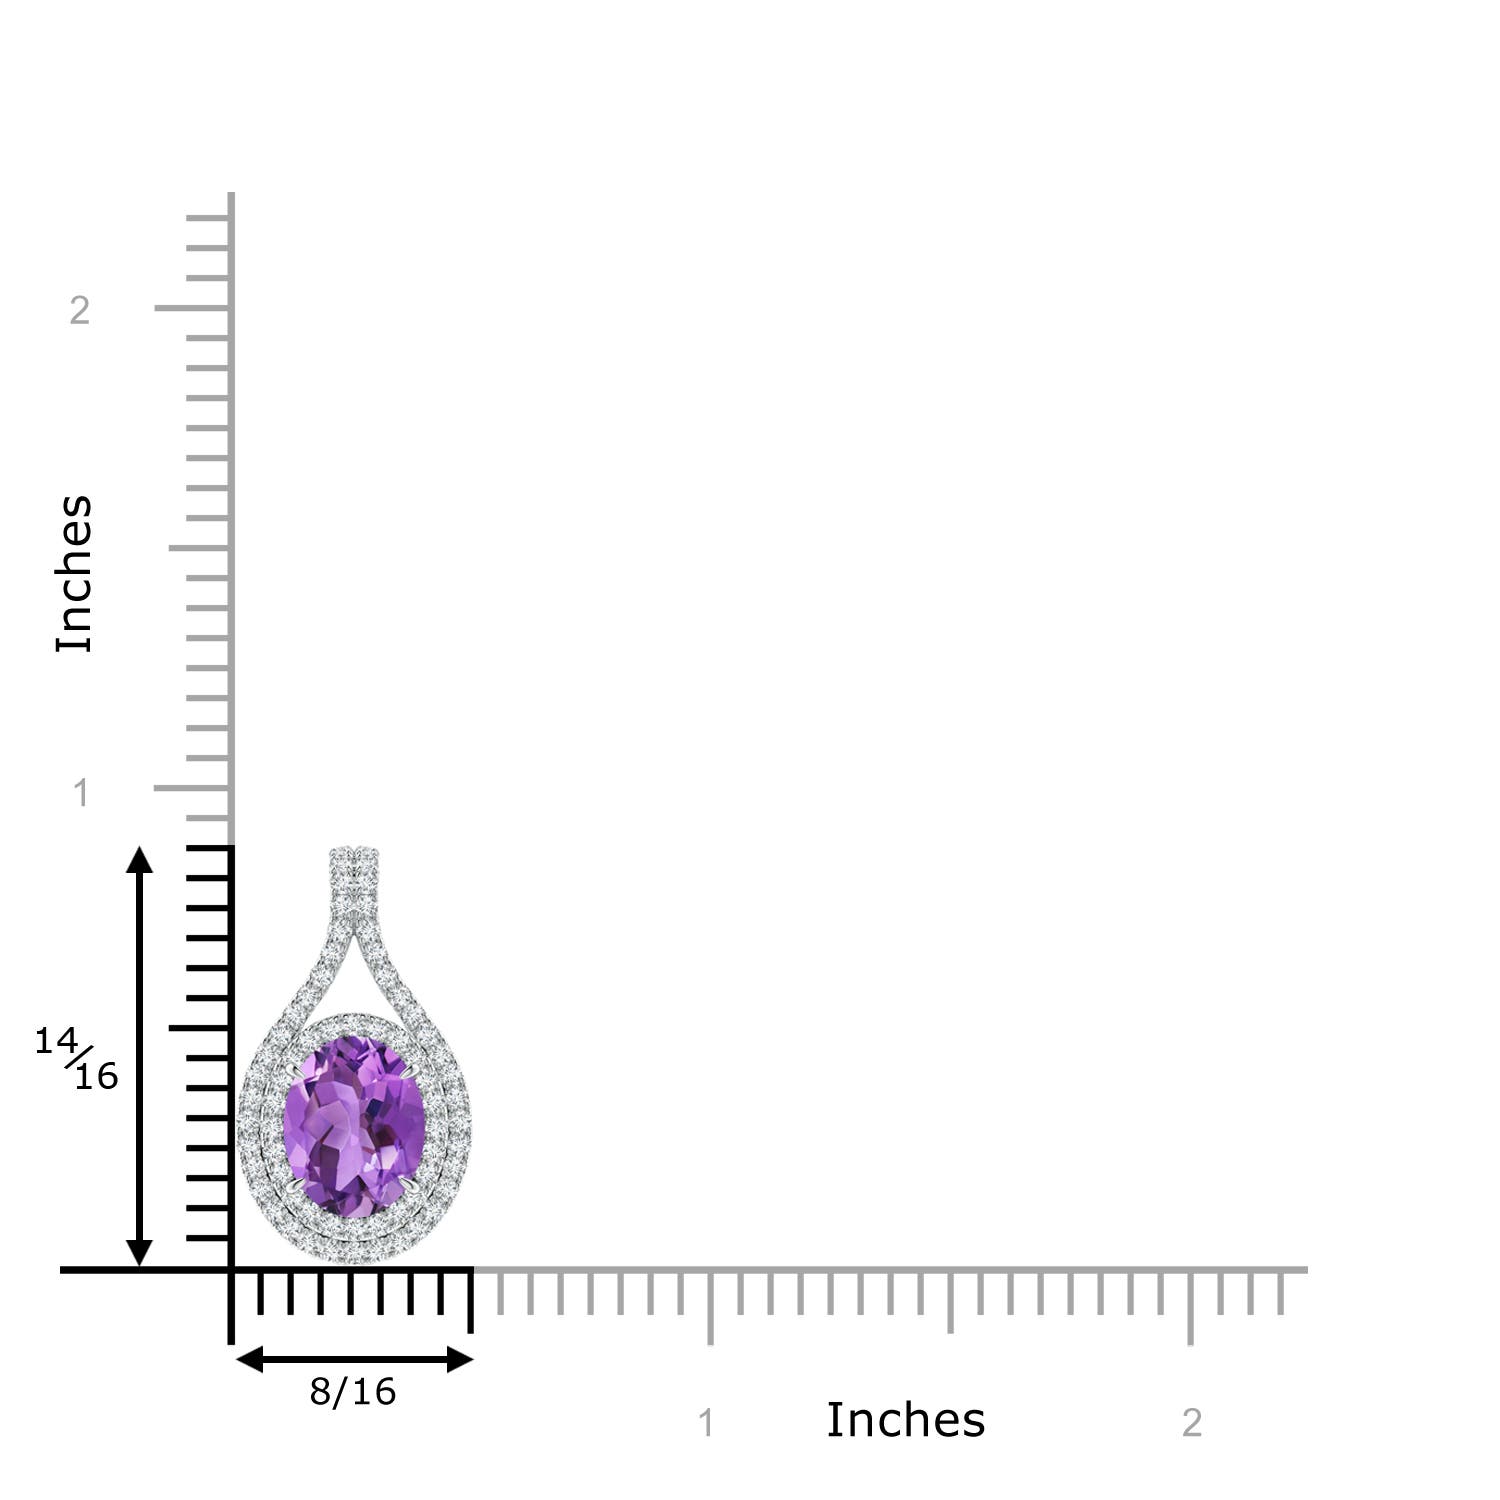 AA - Amethyst / 1.95 CT / 14 KT White Gold